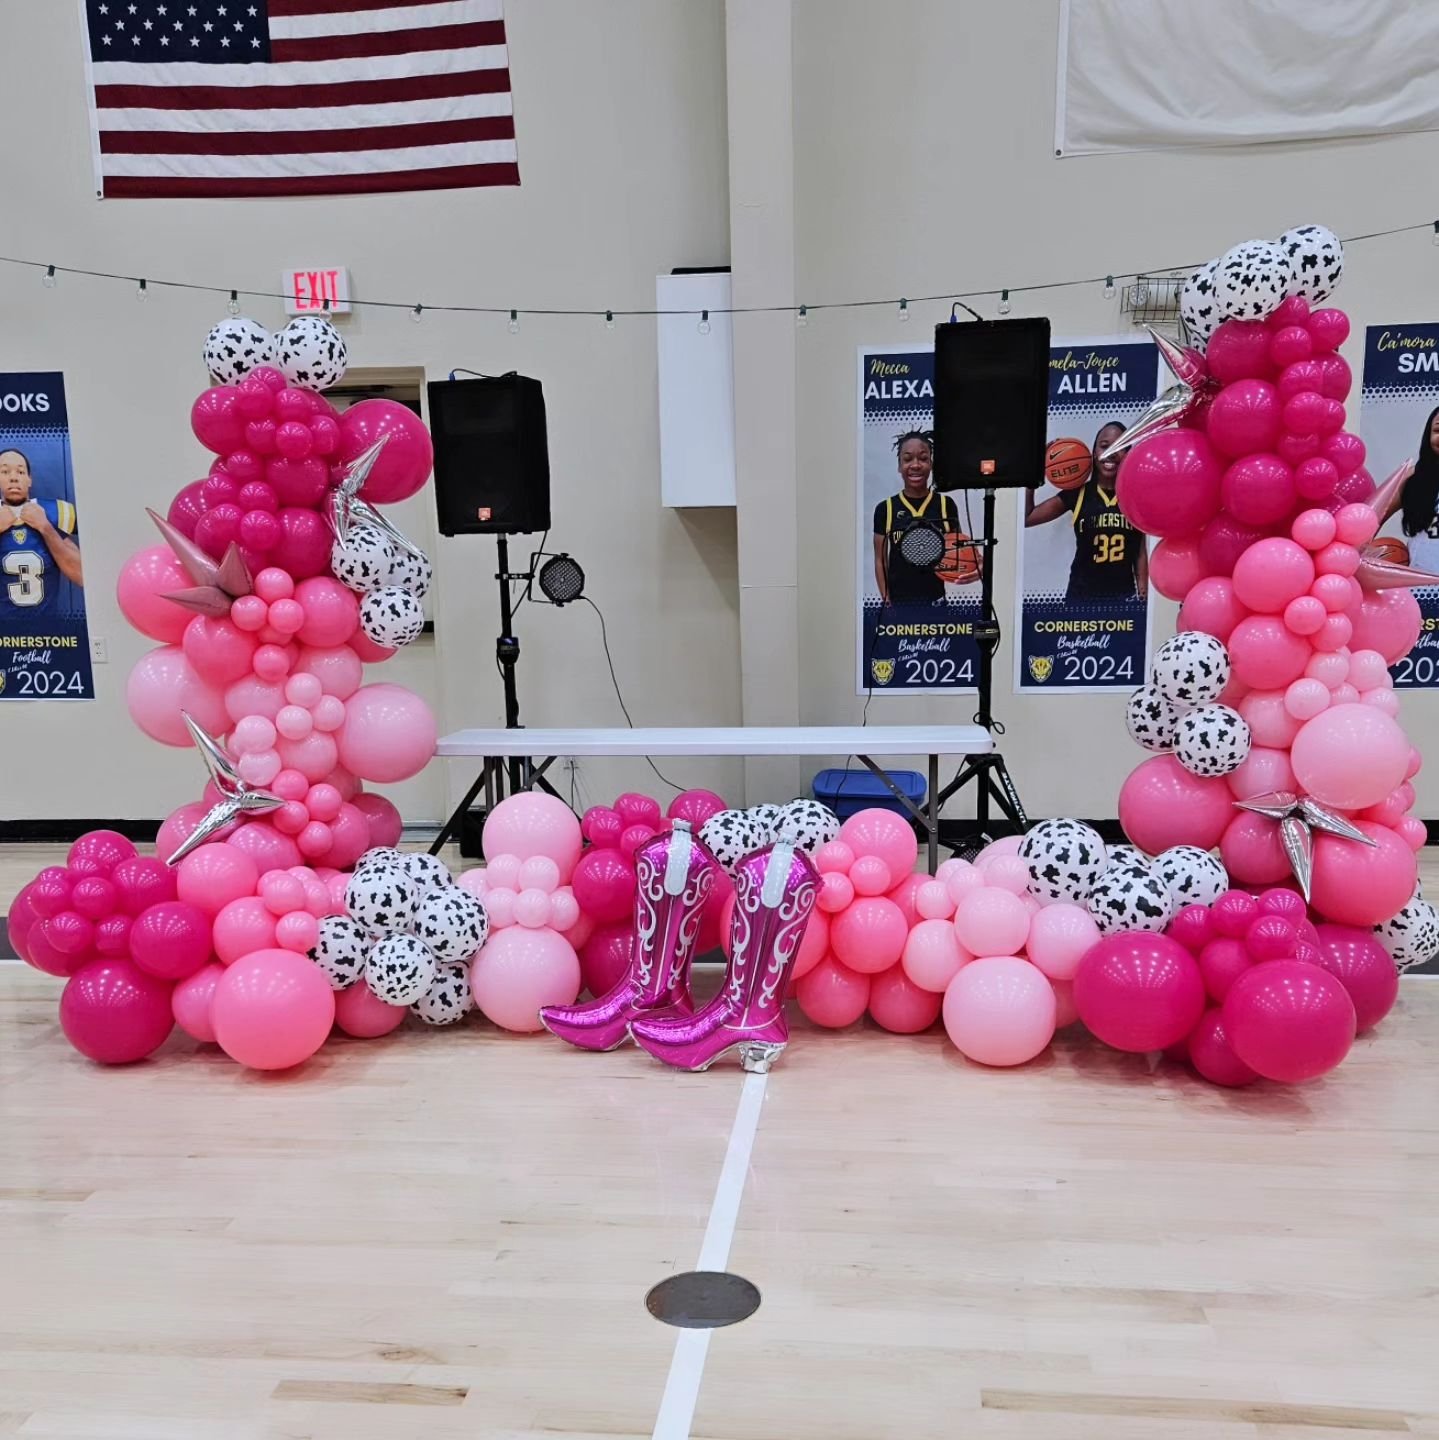 Floor garland is a vibe!
Ready for the school dance.

#pinkballoons #danceballoons #morfincreations #balloons #balloondecor #balloongarland #professionalballoons